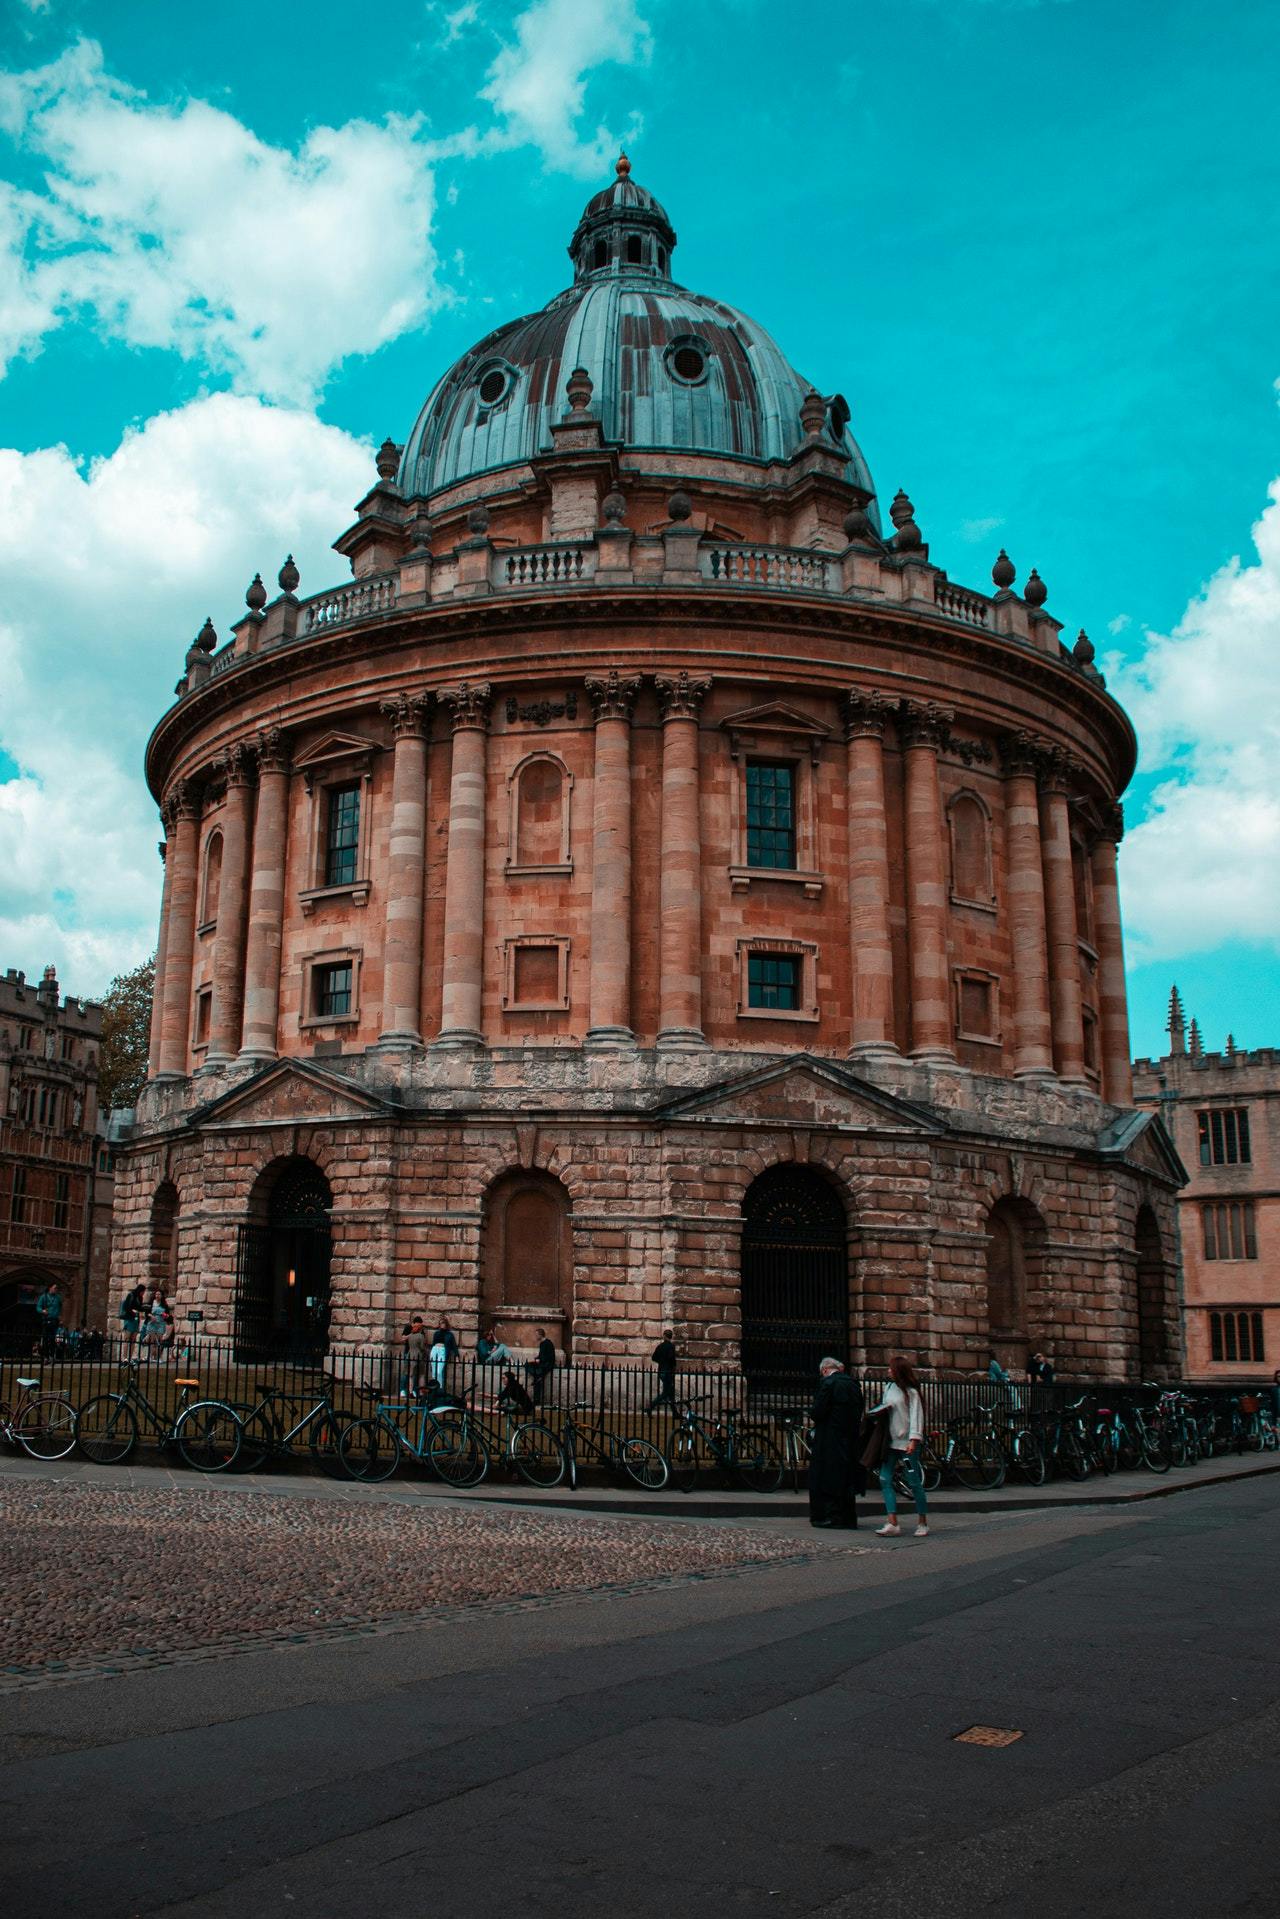 Oxford self-guided walking tour on its University and traditions